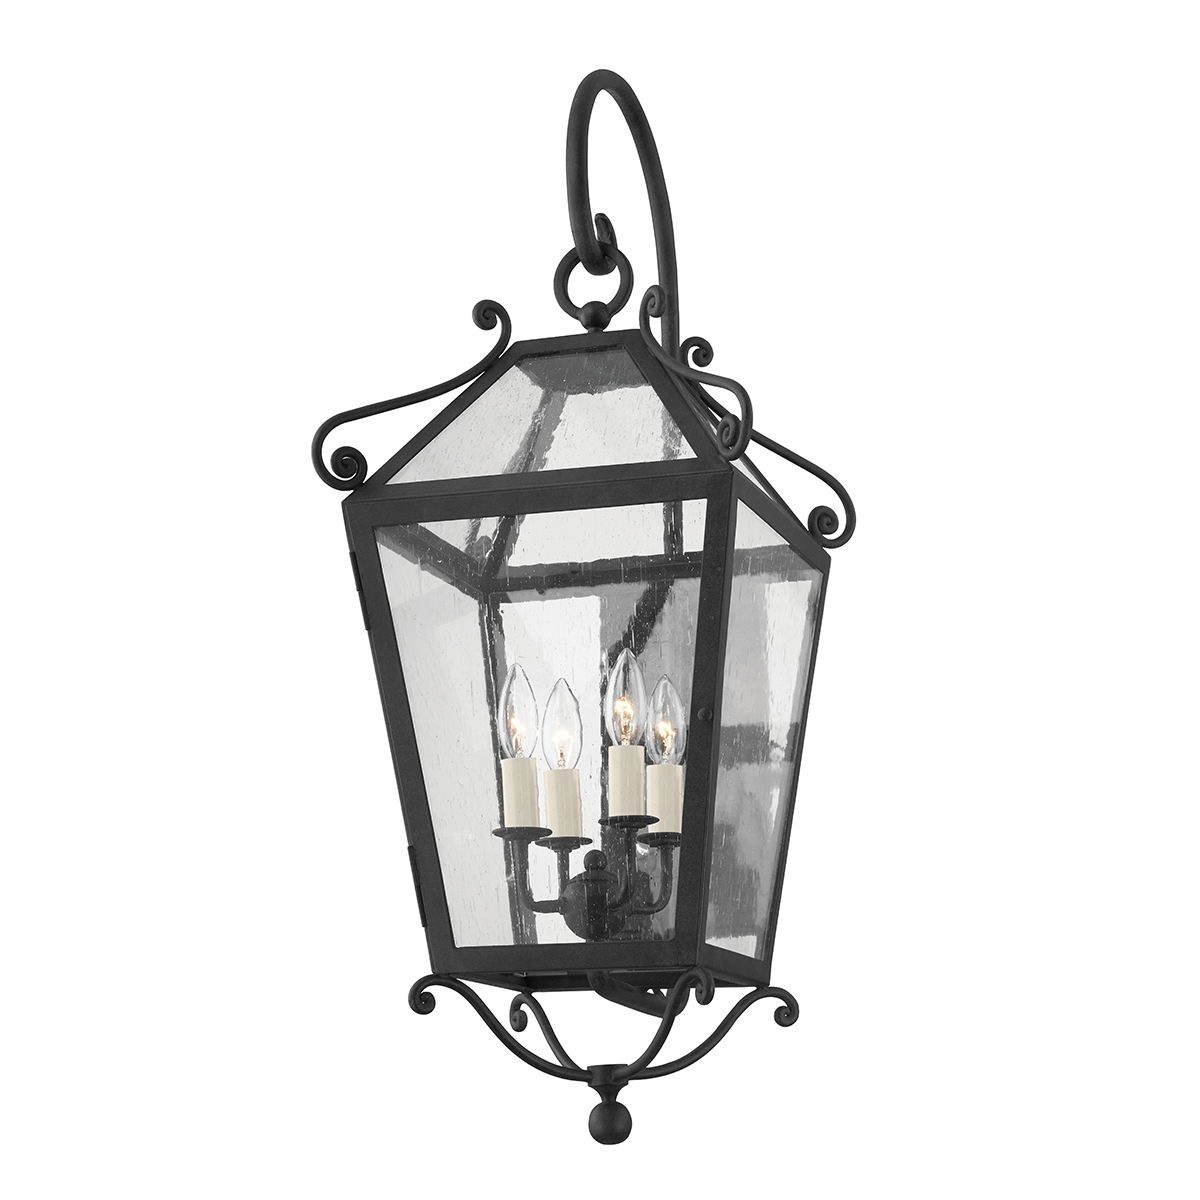 Troy Lighting 4 LIGHT LARGE EXTERIOR WALL SCONCE B4124 Outdoor l Wall Troy Lighting FRENCH IRON  